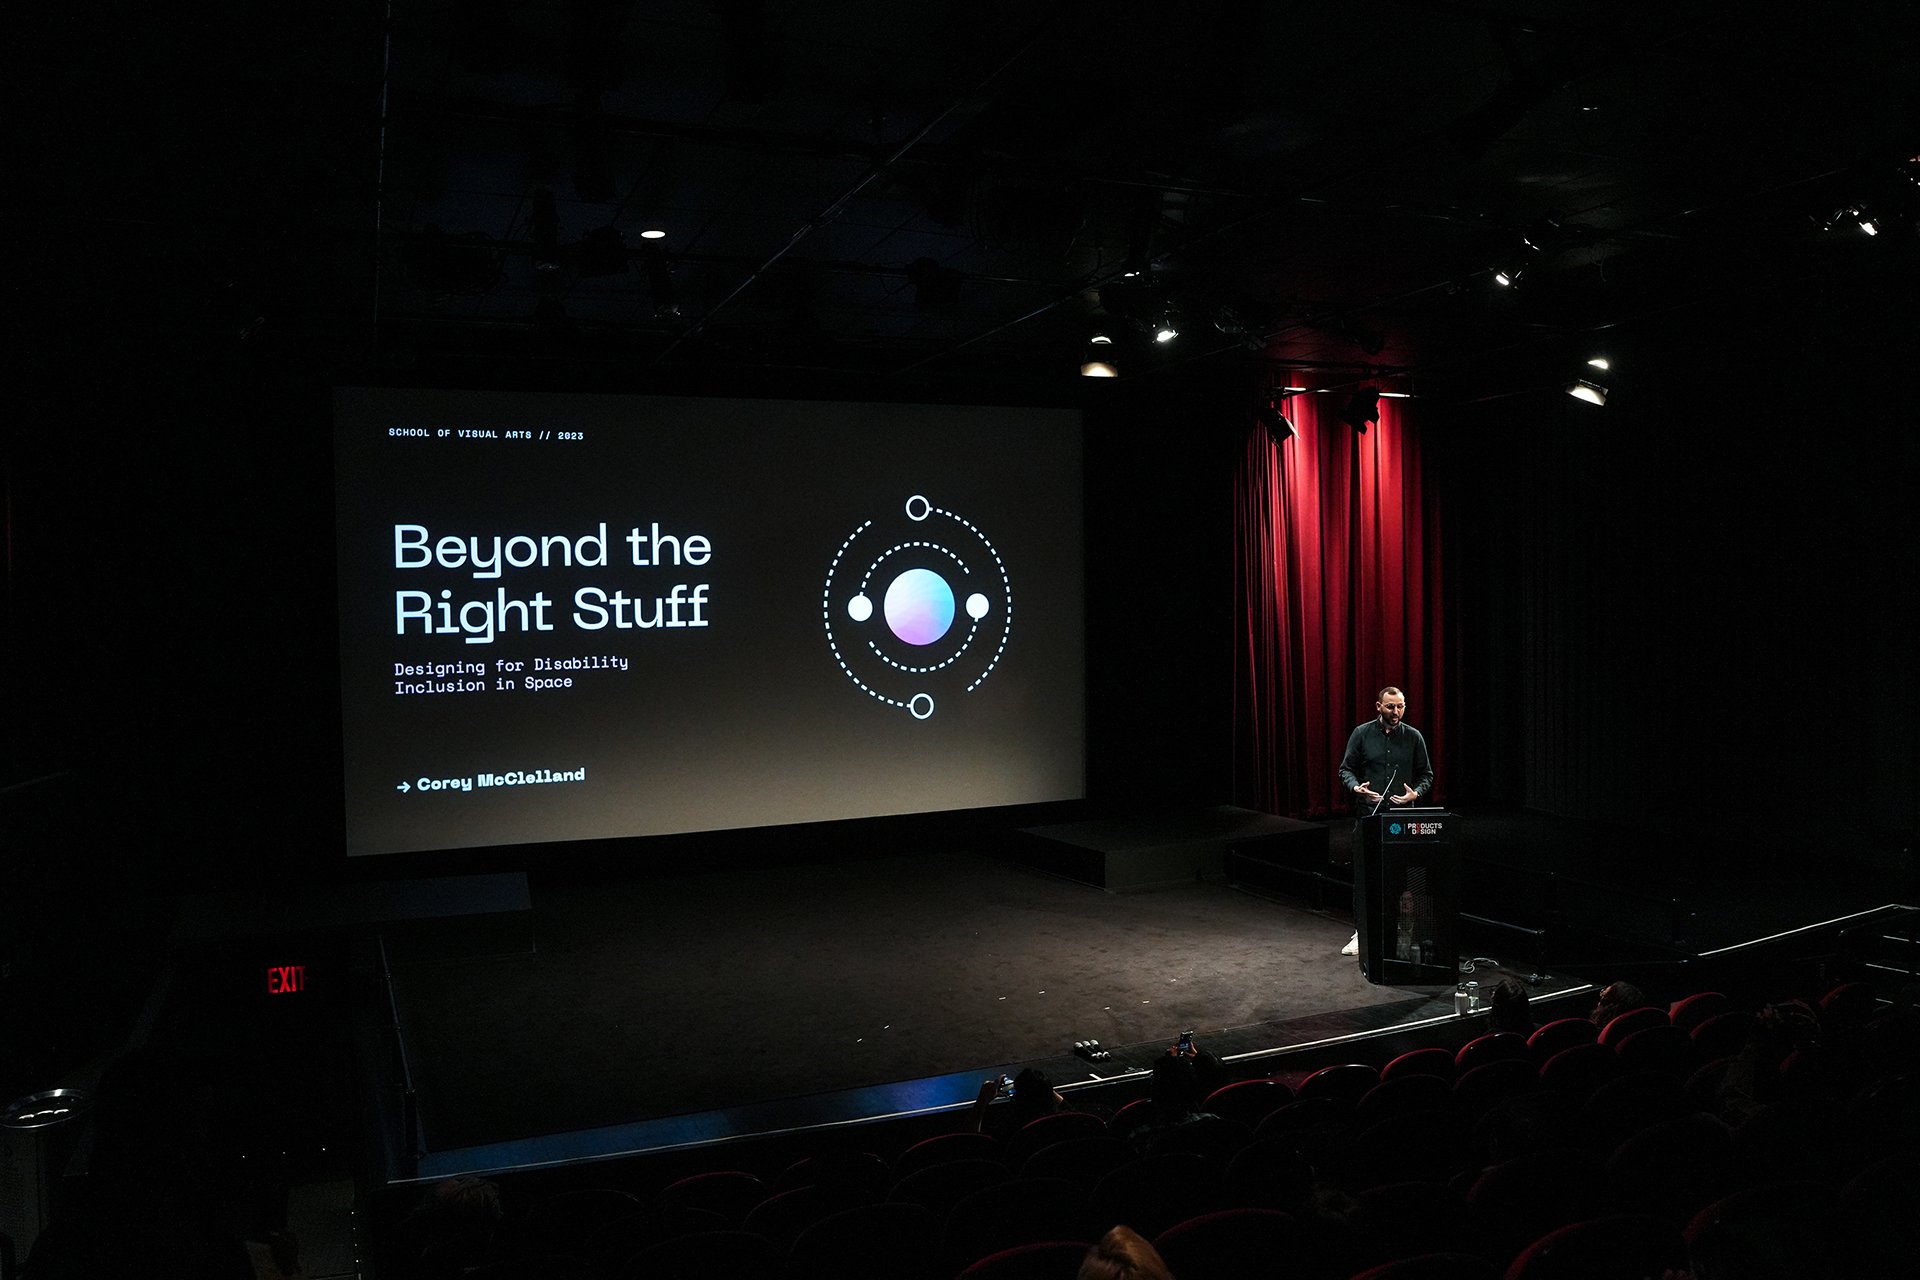  View of SVA Theatre stage at a distance with speaker at podium. The screen says “Beyond the Right Stuff” on a black graphic. 